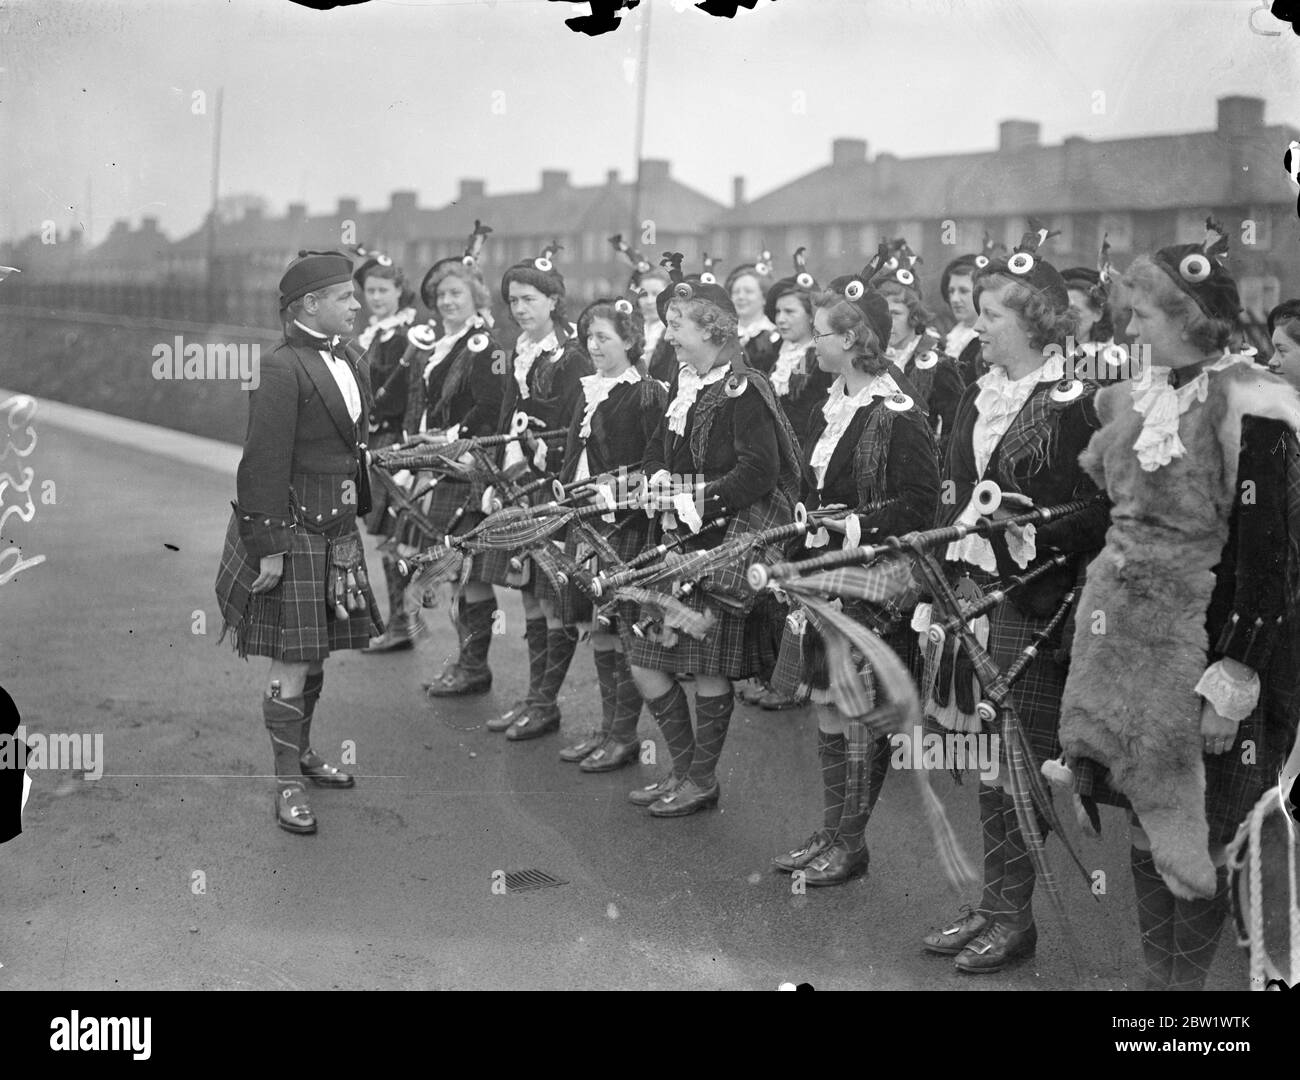 Dagenham Girl Pipers welcomed their new 'Chieftain'. Pipe Maj George Greenfield of the Royal Scots, recognised as one of Scotland's greatest experts on the bagpipes and Highland Dances, was met at Heathway station (District Railway) by the band of the Dagenham Girl Pipers in full uniform when he arrived at Dagenham, Essex, to become Pipe Maj of the Girl Pipers. George Greenfield enlisted in the Royal Scot as a boy piper and has now completed his 21 years service. As 'Chieftain' of the Dagenham Girl Pipers he will be responsible for the piping and dancing instruction of over 50 girls. Photo sho Stock Photo